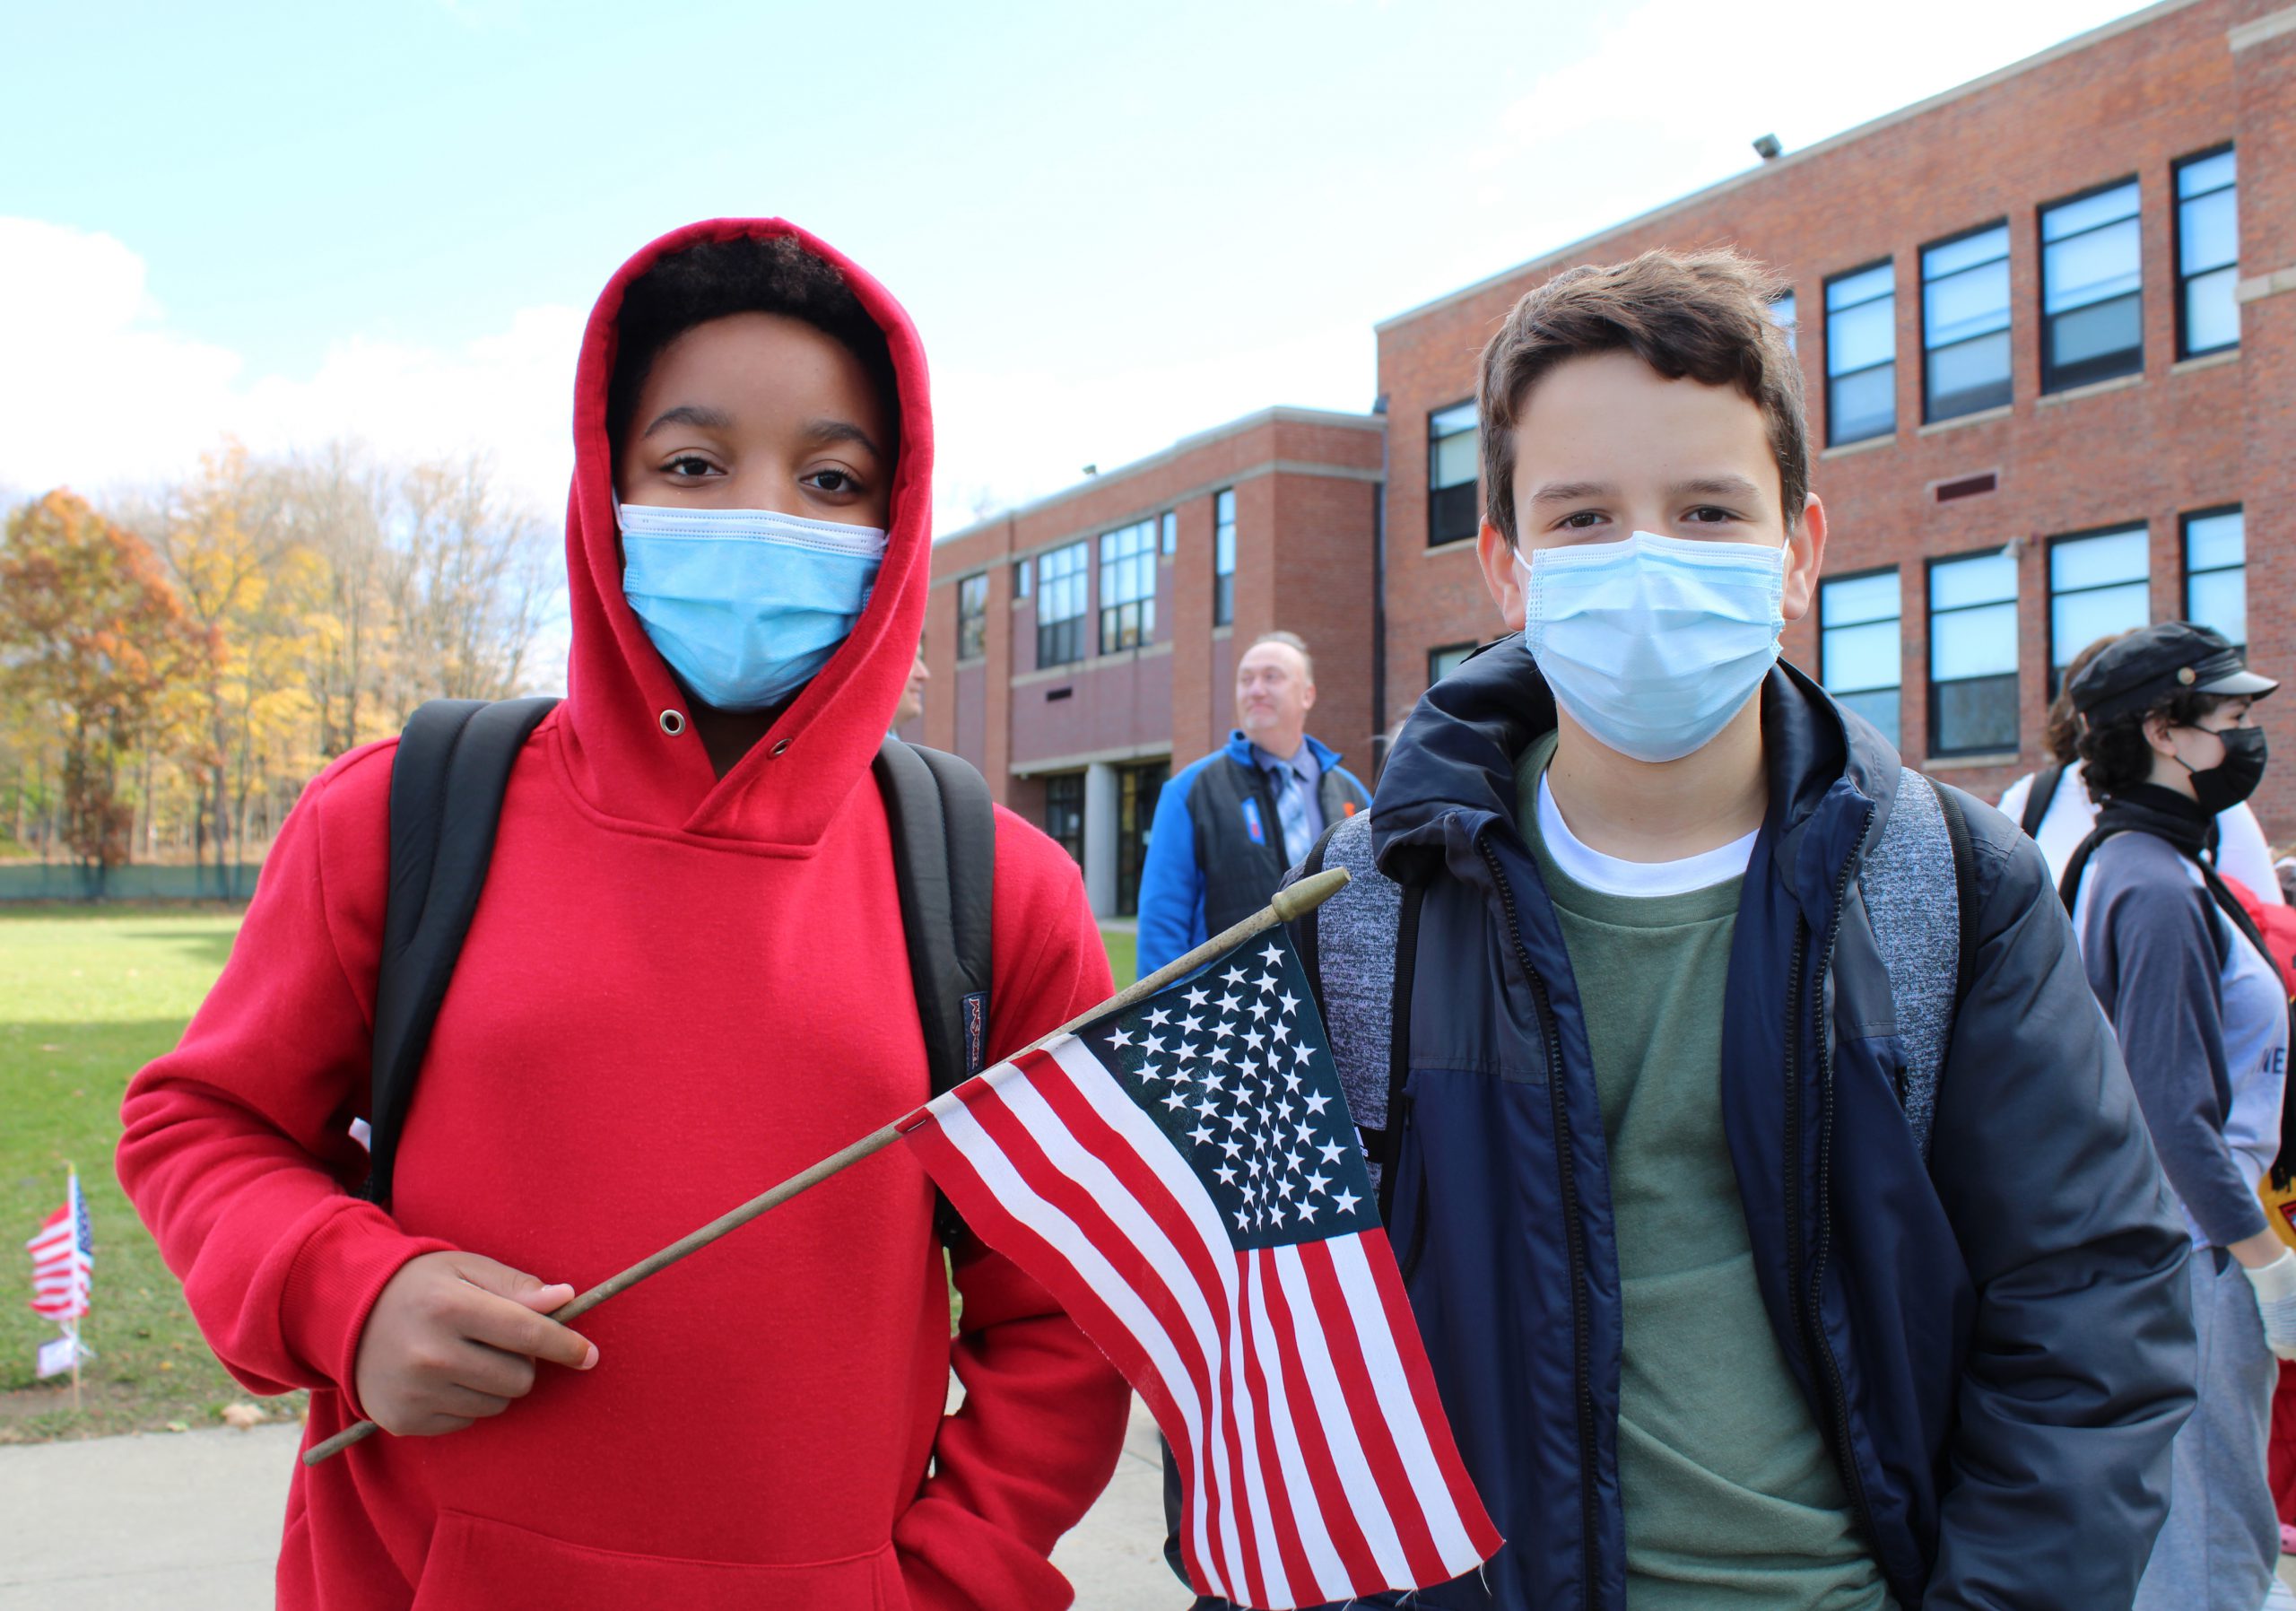 Two middle school boys stand outside, a brick building behind them and a blue sky. On the left the boy is wearing a red hooded sweatshirt and blue mask. He is holding an American flag. The boy on the right is wearing a blue jacket, green shirt and a blue mask.